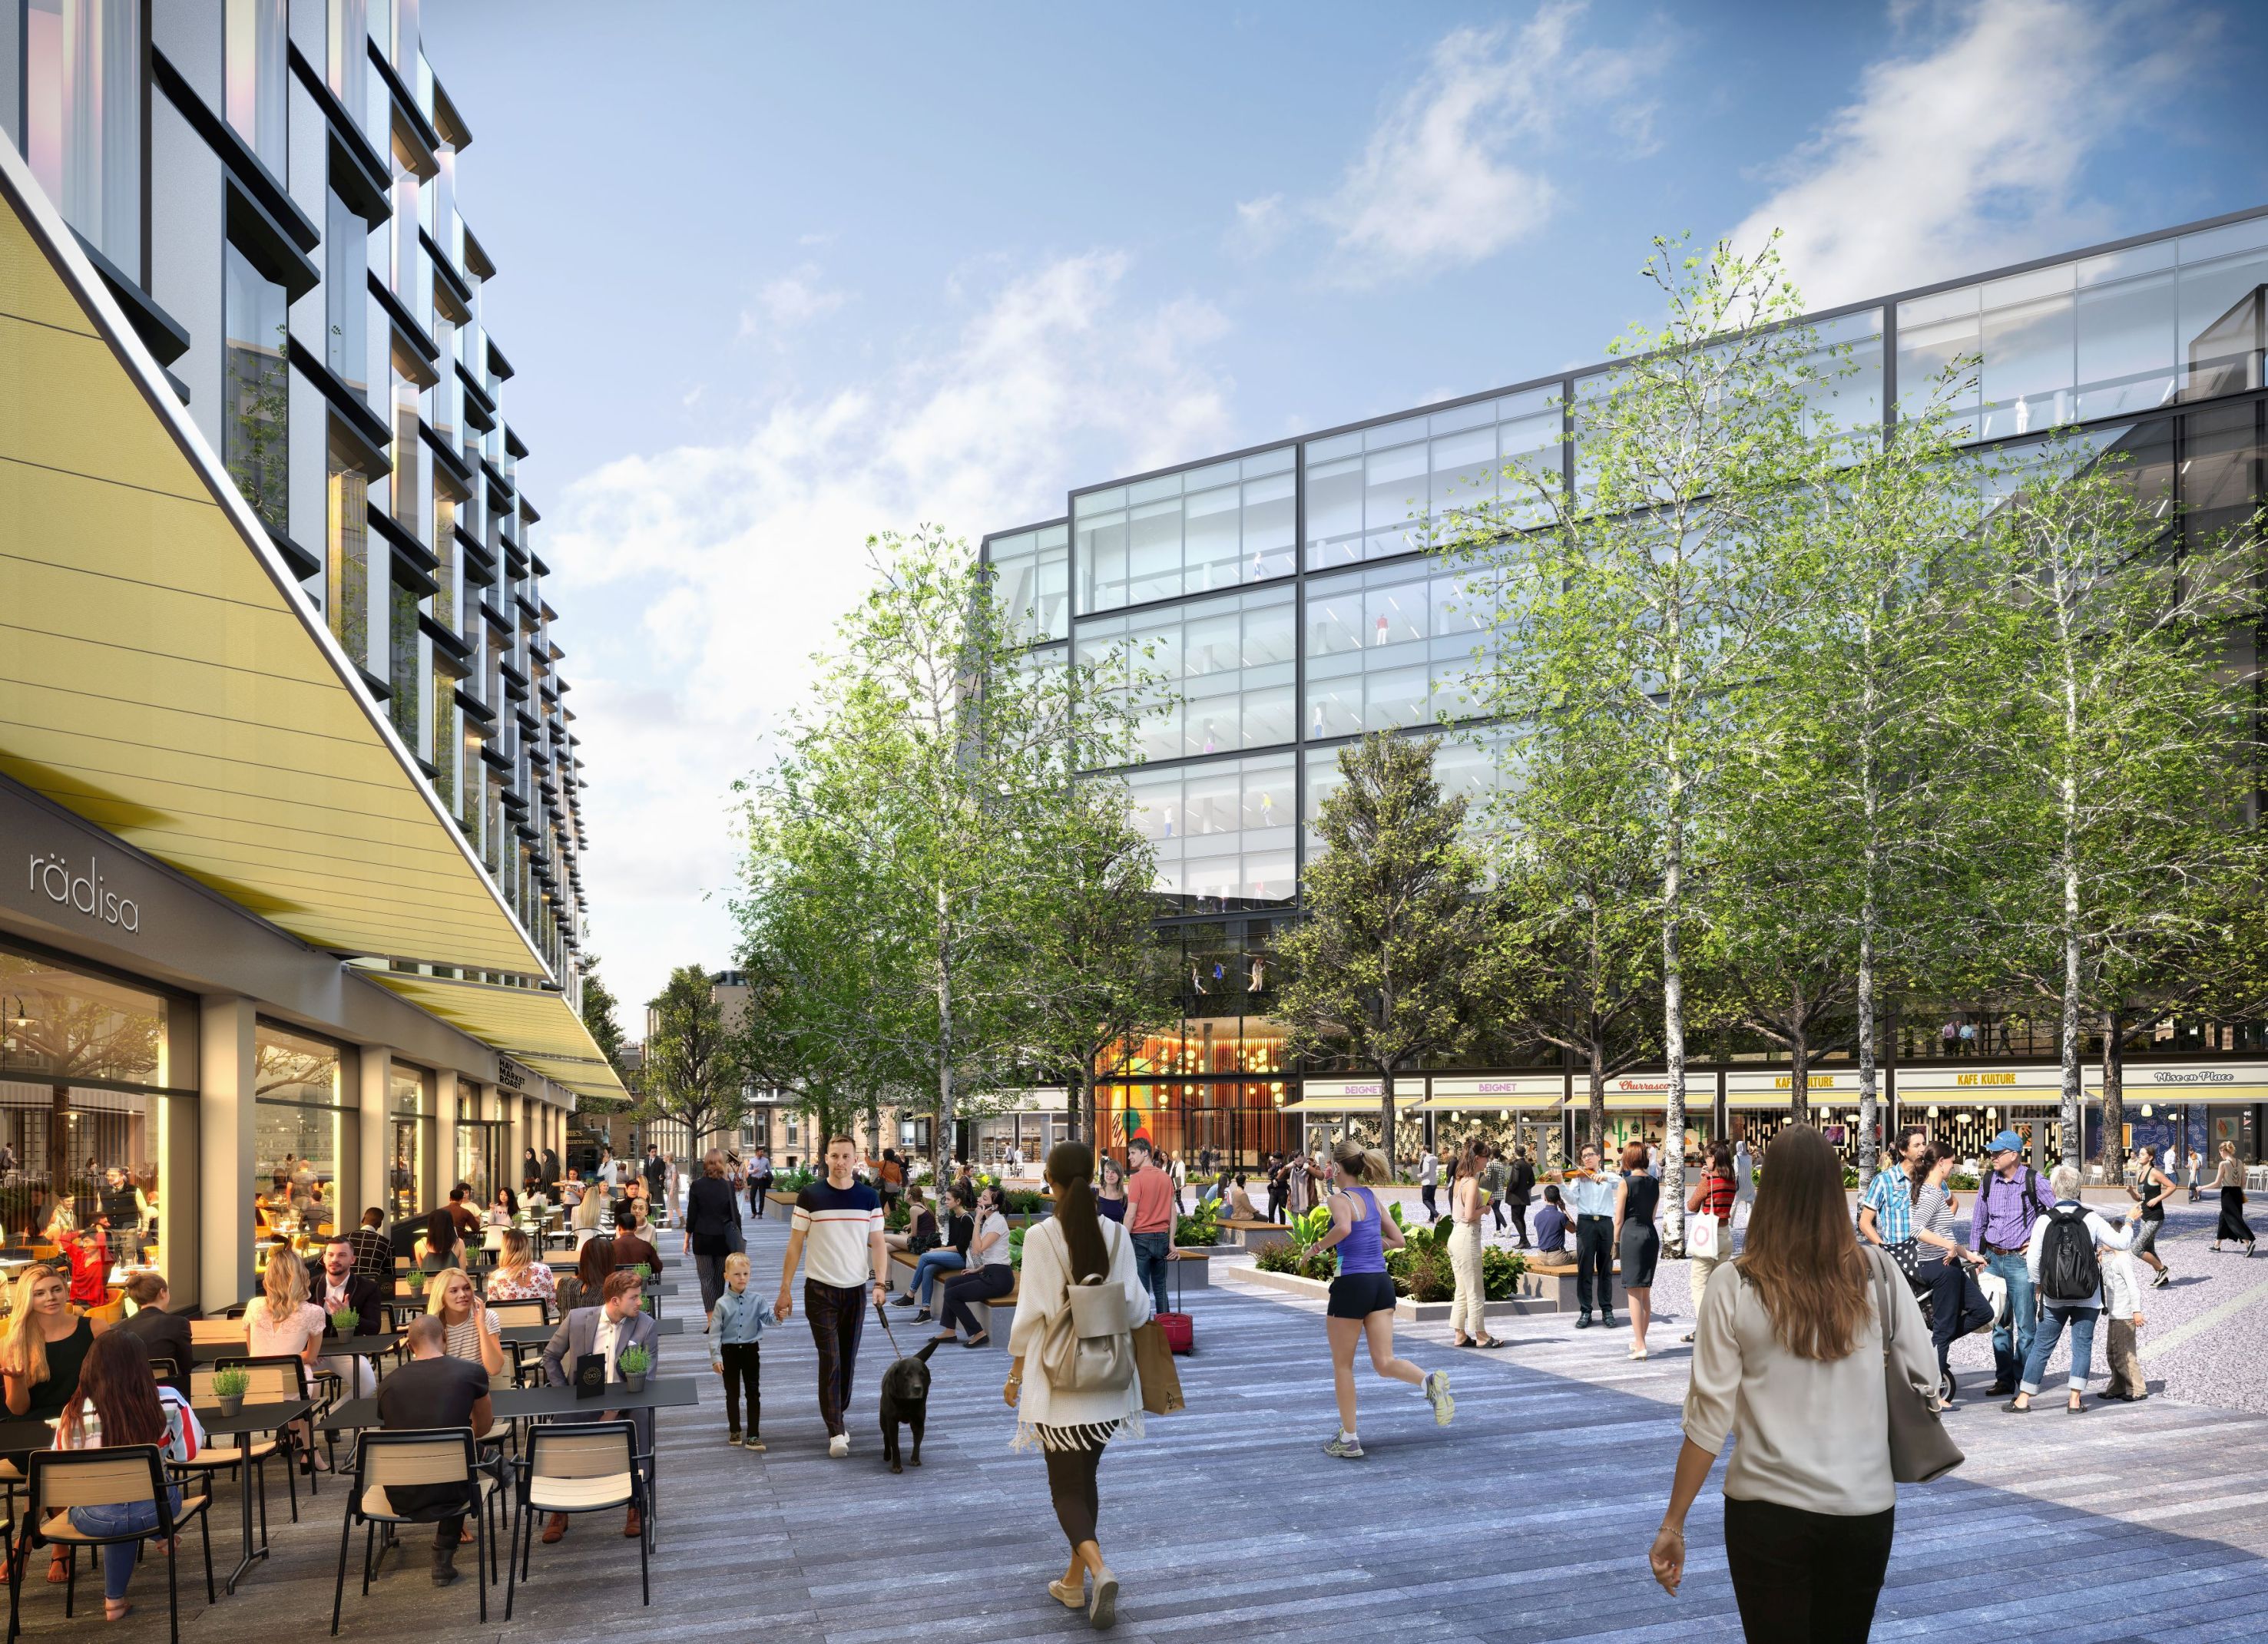 M&G’s Haymarket Edinburgh development fully let two years ahead of completion